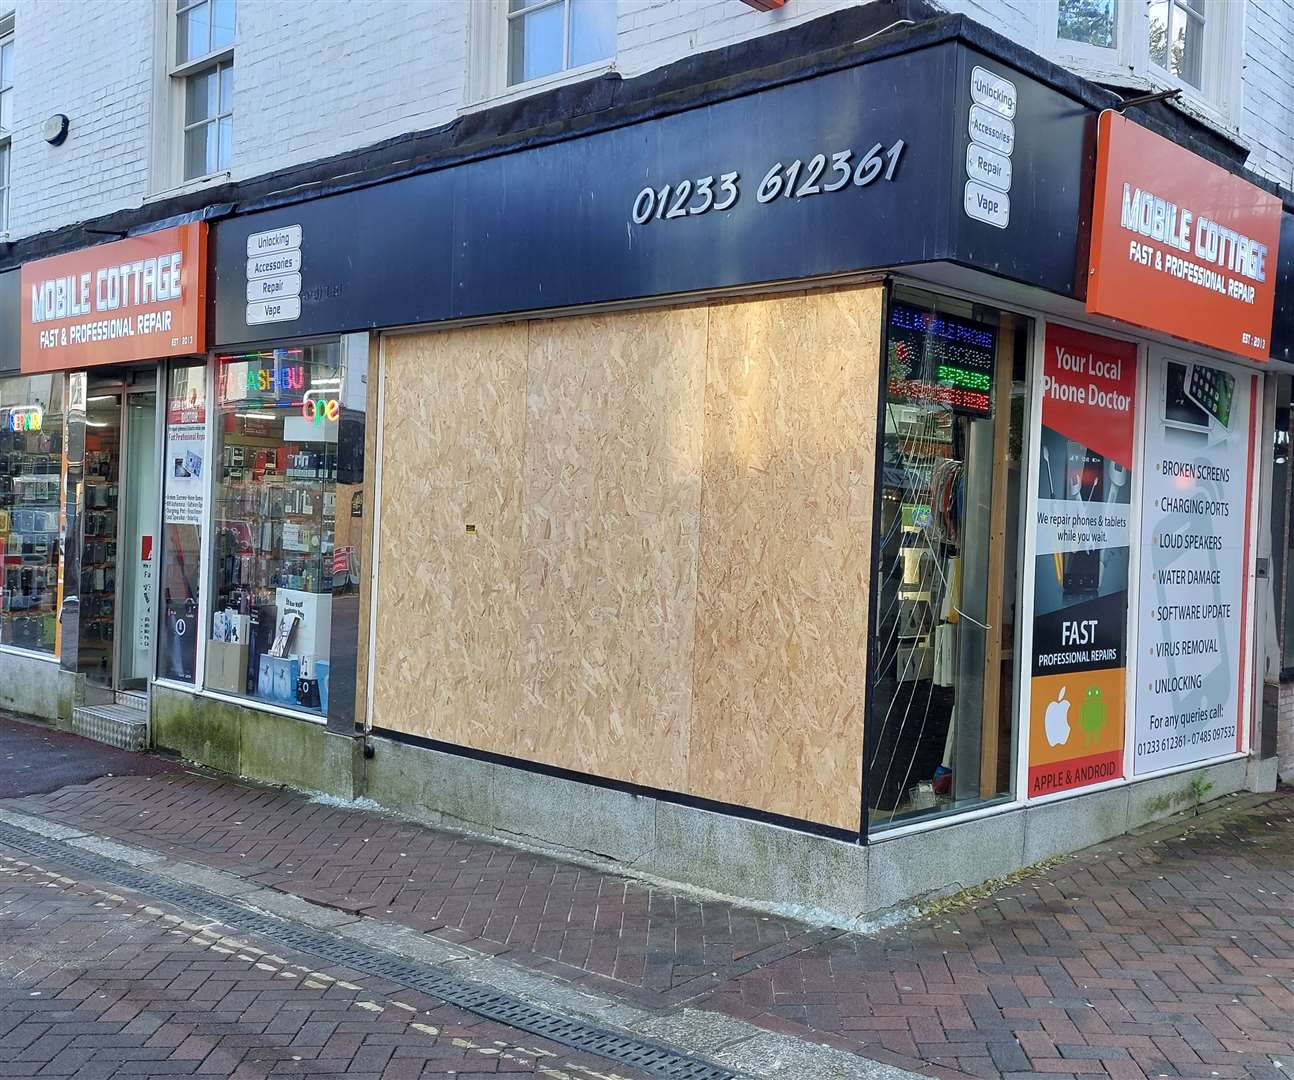 There was a break-in at Mobile Cottage in Ashford last night